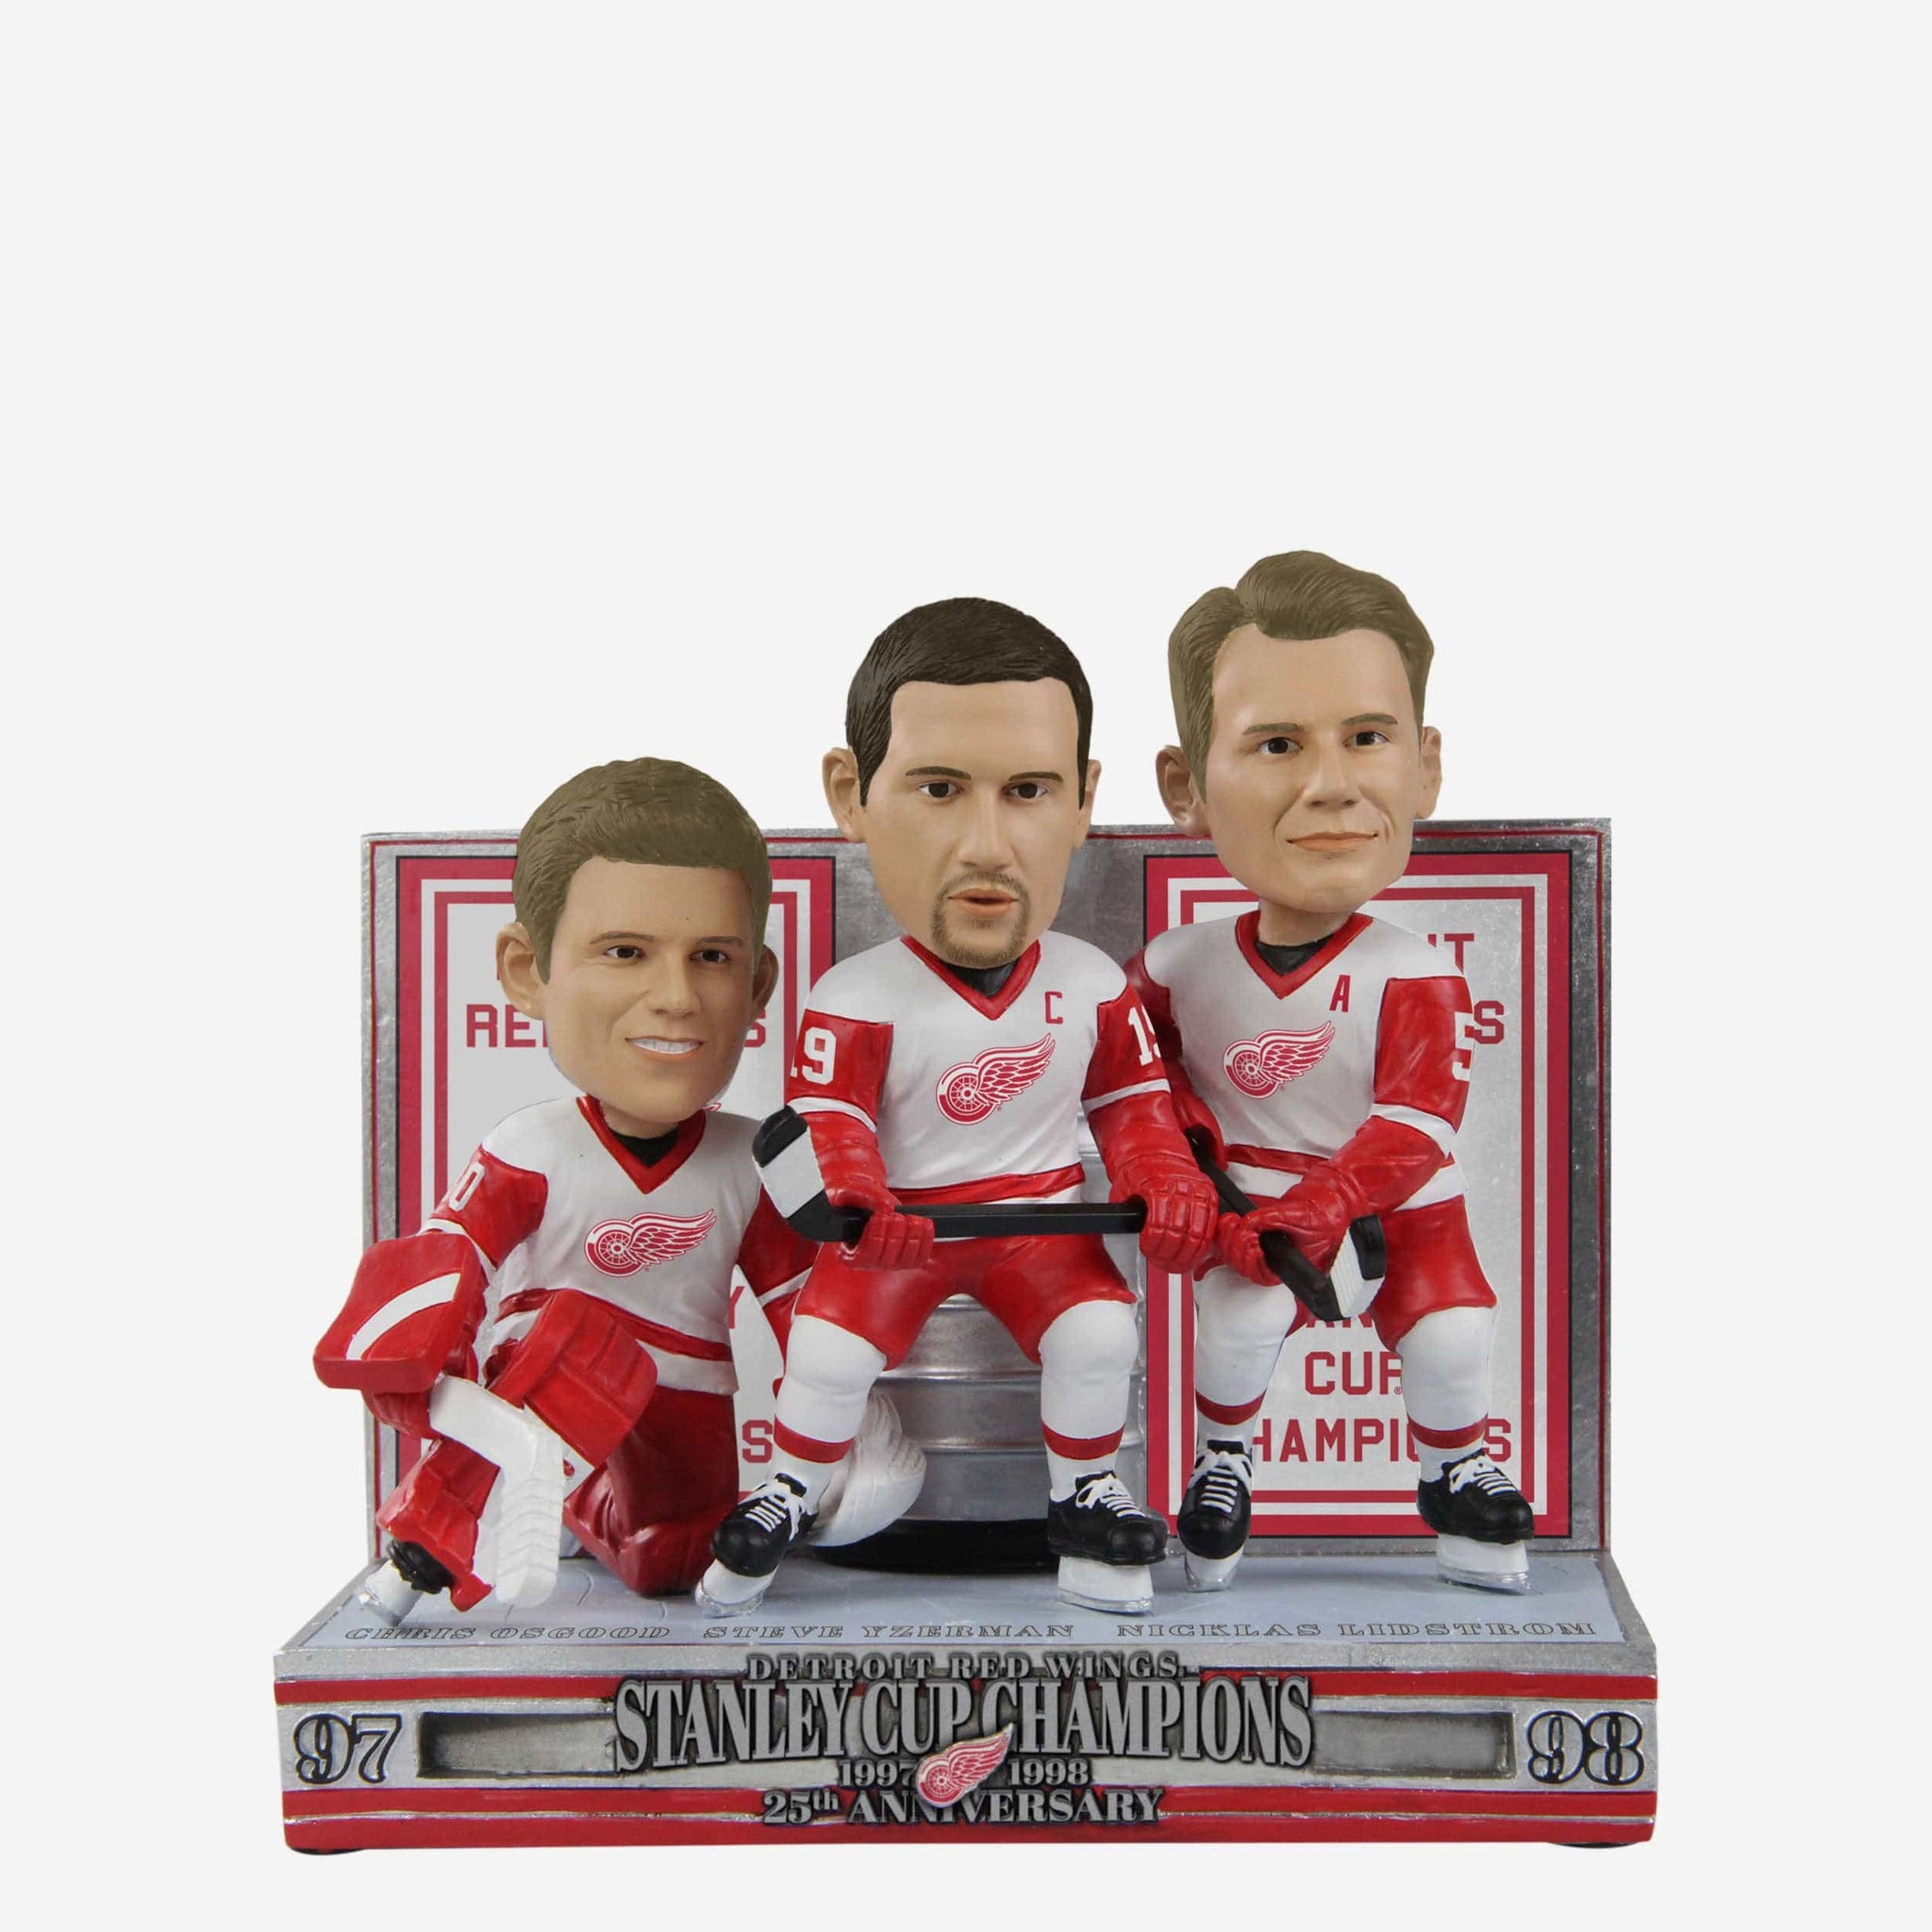 Hockeytown 25th Anniversary Celebration: 1997 Detroit Red Wings Stanley Cup  Championship Team 